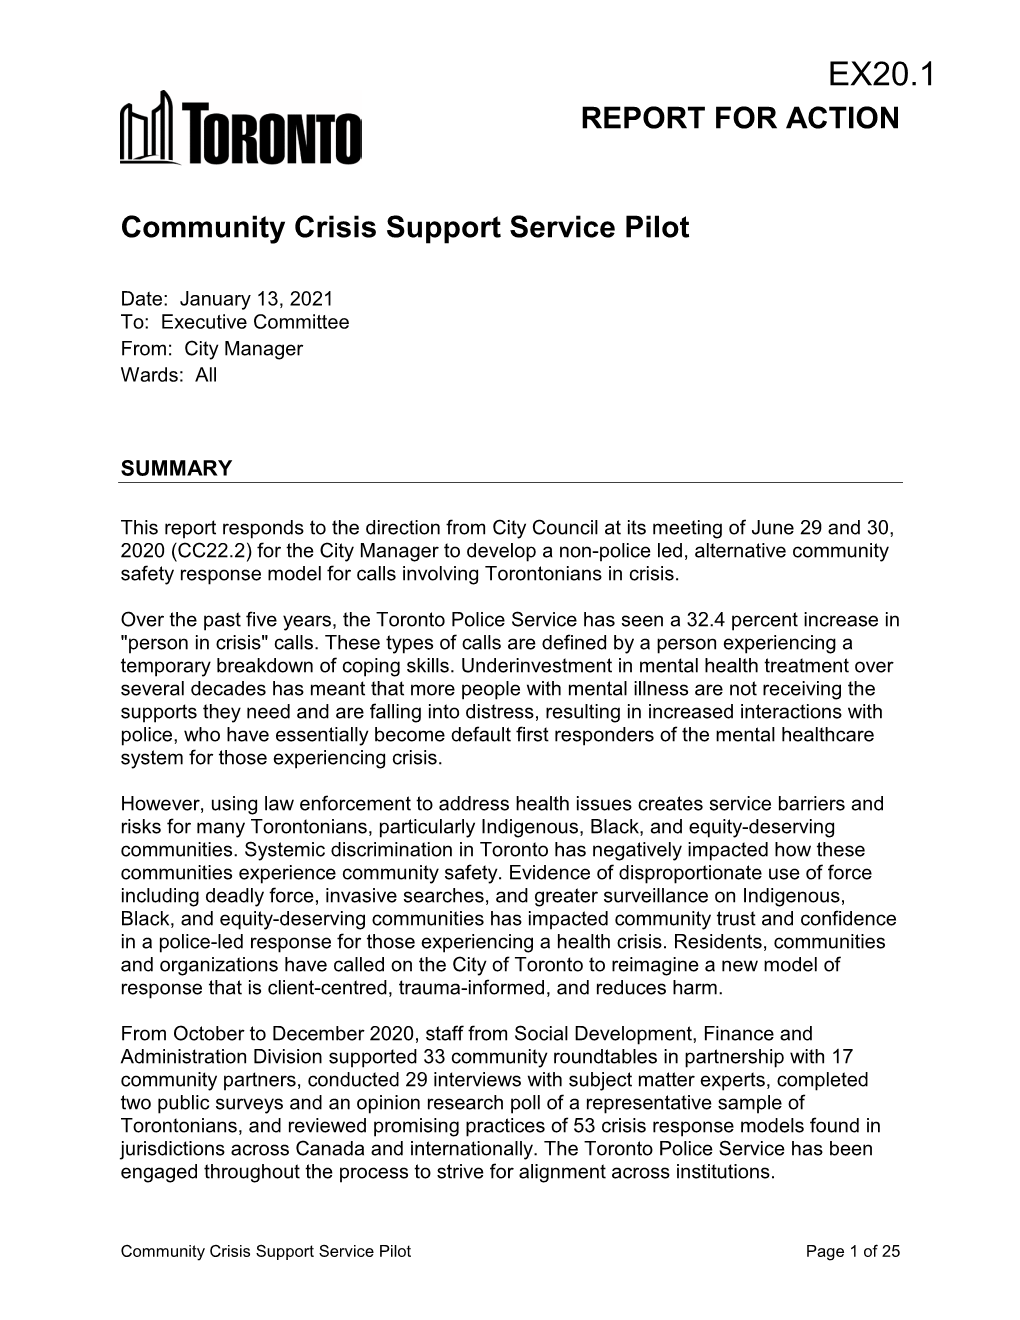 REPORT for ACTION Community Crisis Support Service Pilot